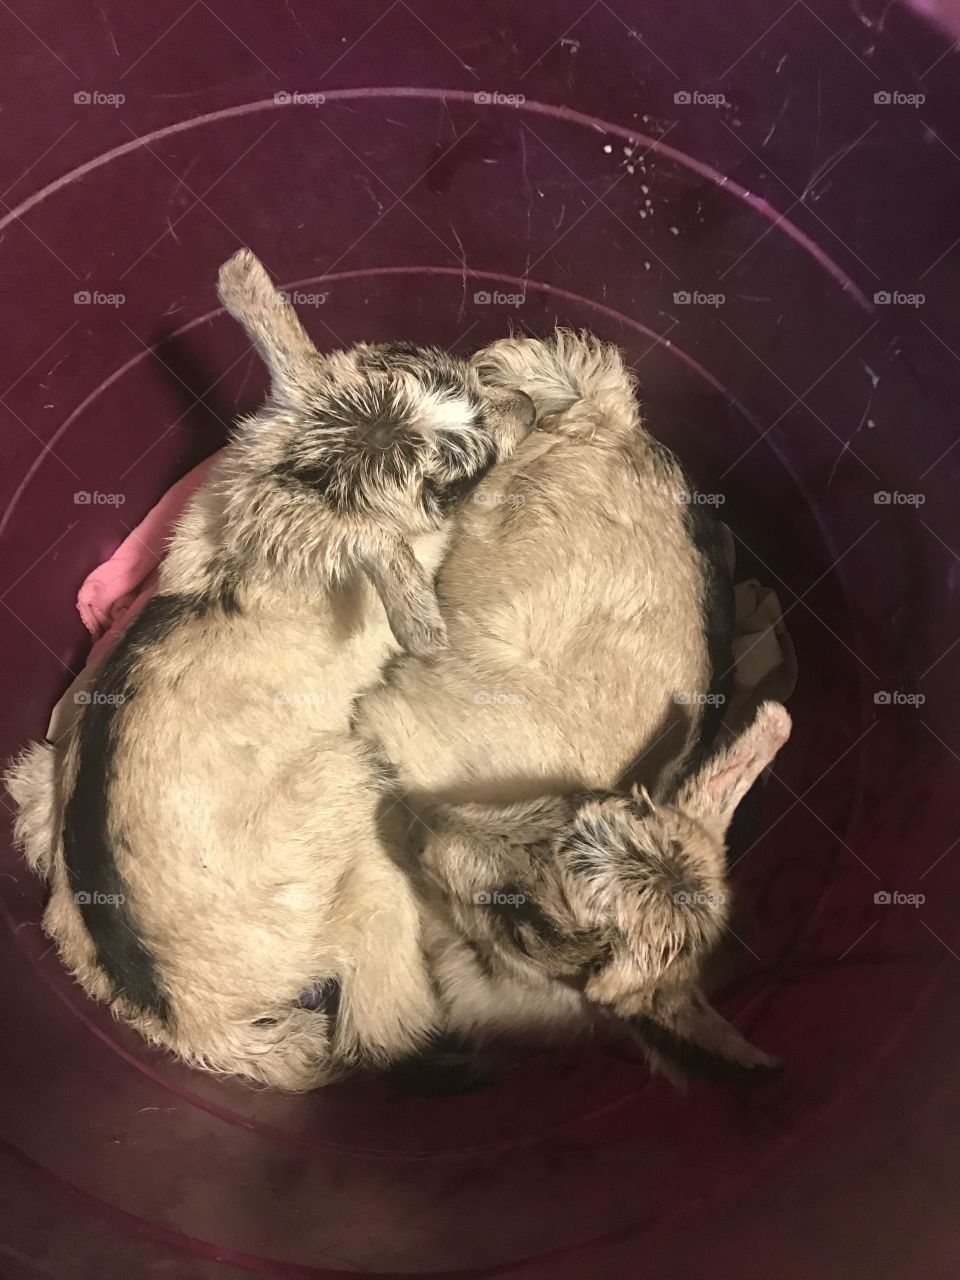 Goats in a tub 